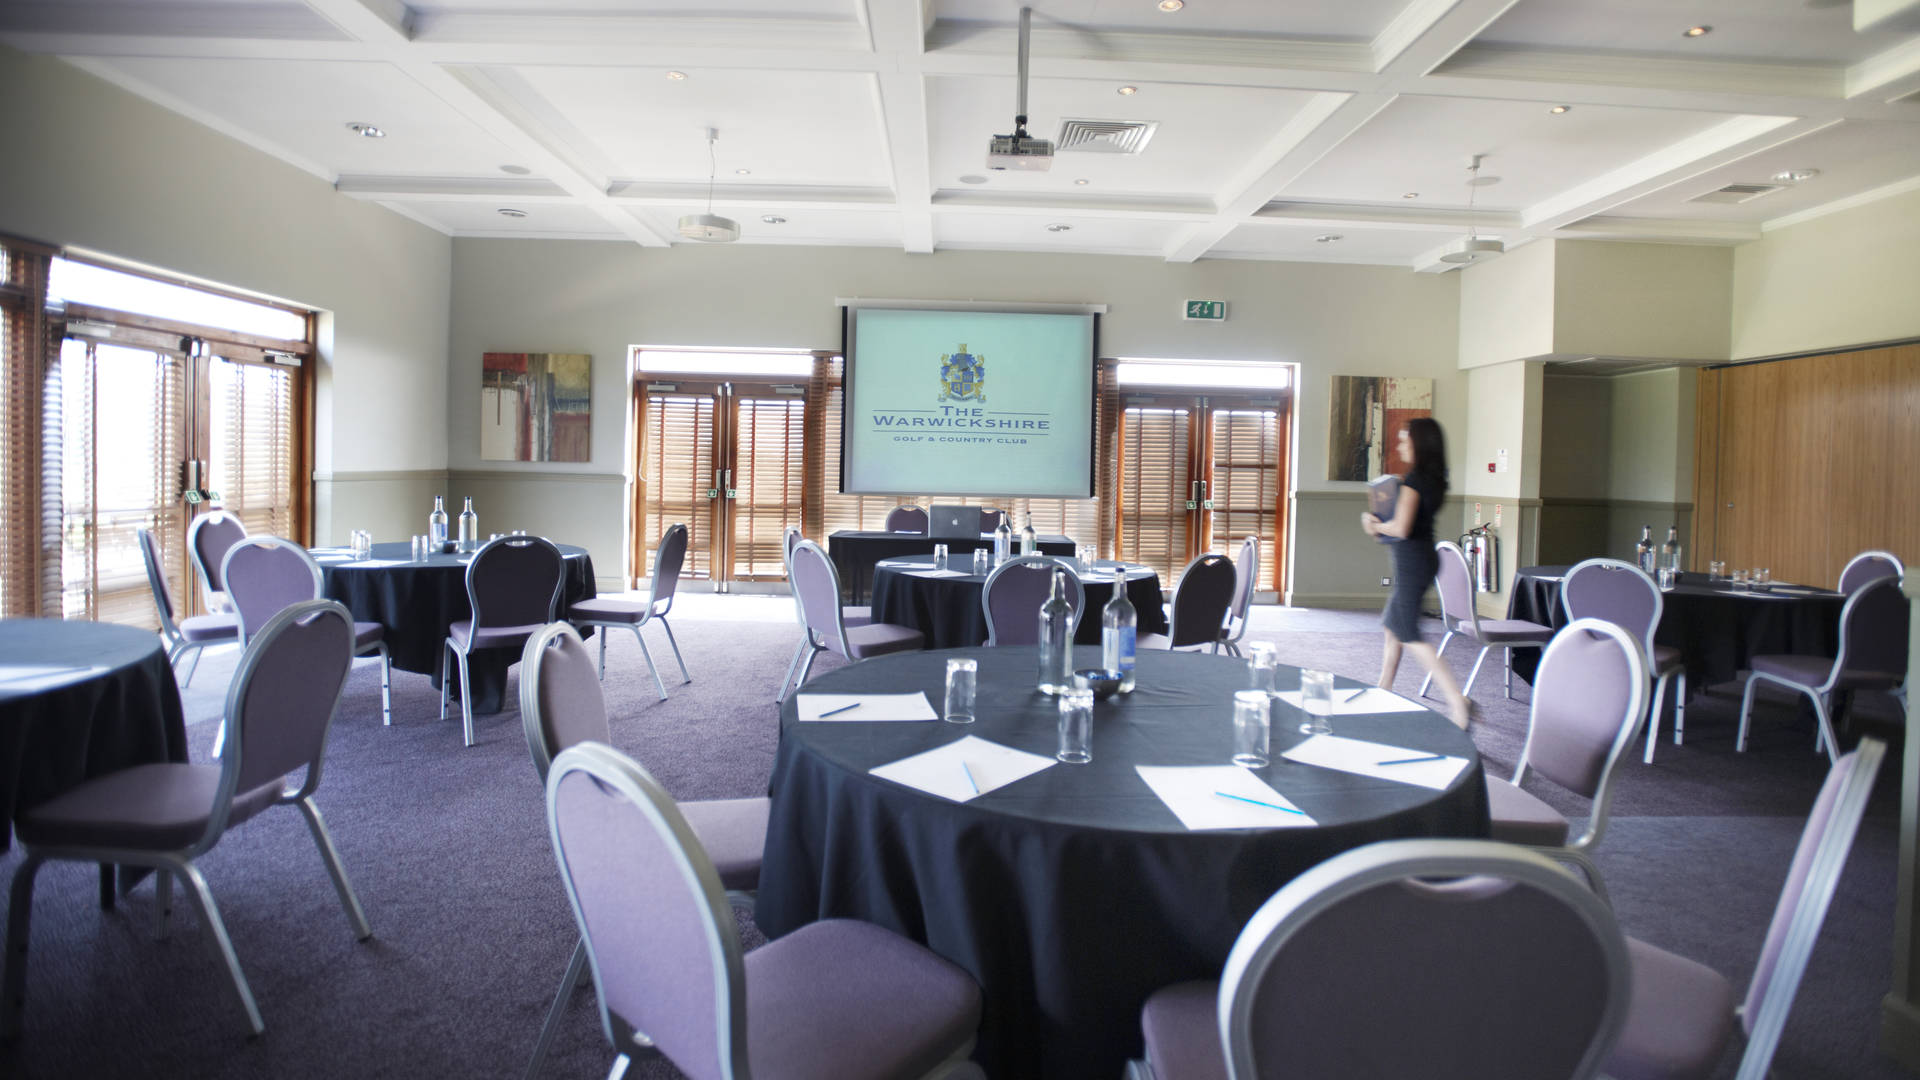 Meetings and Conferences at the Warwickshire Image